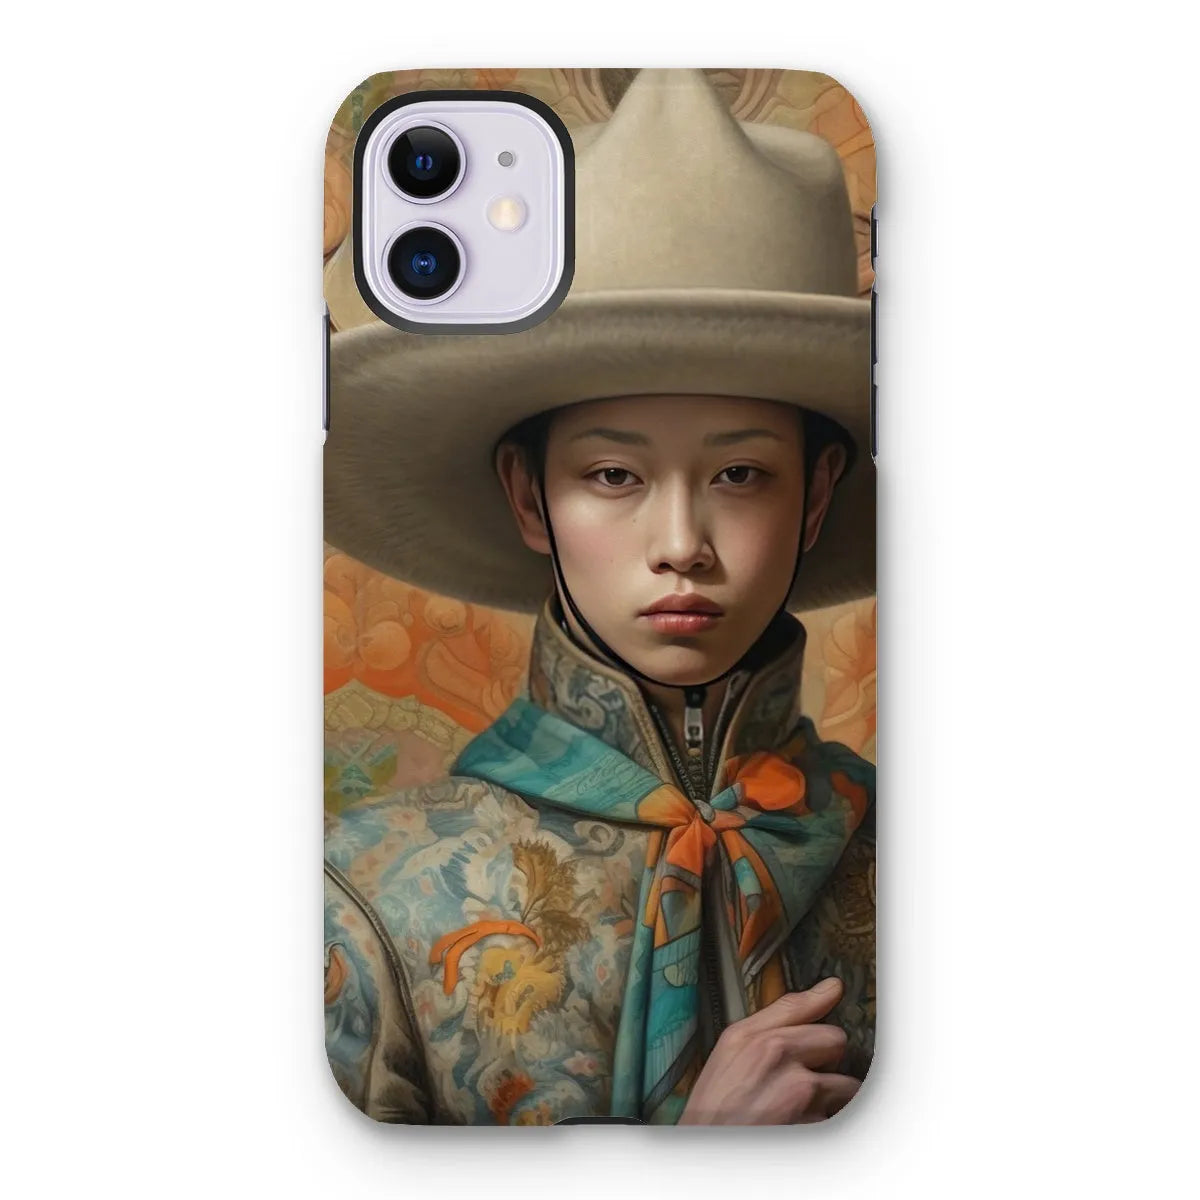 Xiang - Gaysian Chinese Cowboy Aesthetic Art Phone Case - Iphone 11 / Matte - Mobile Phone Cases - Aesthetic Art